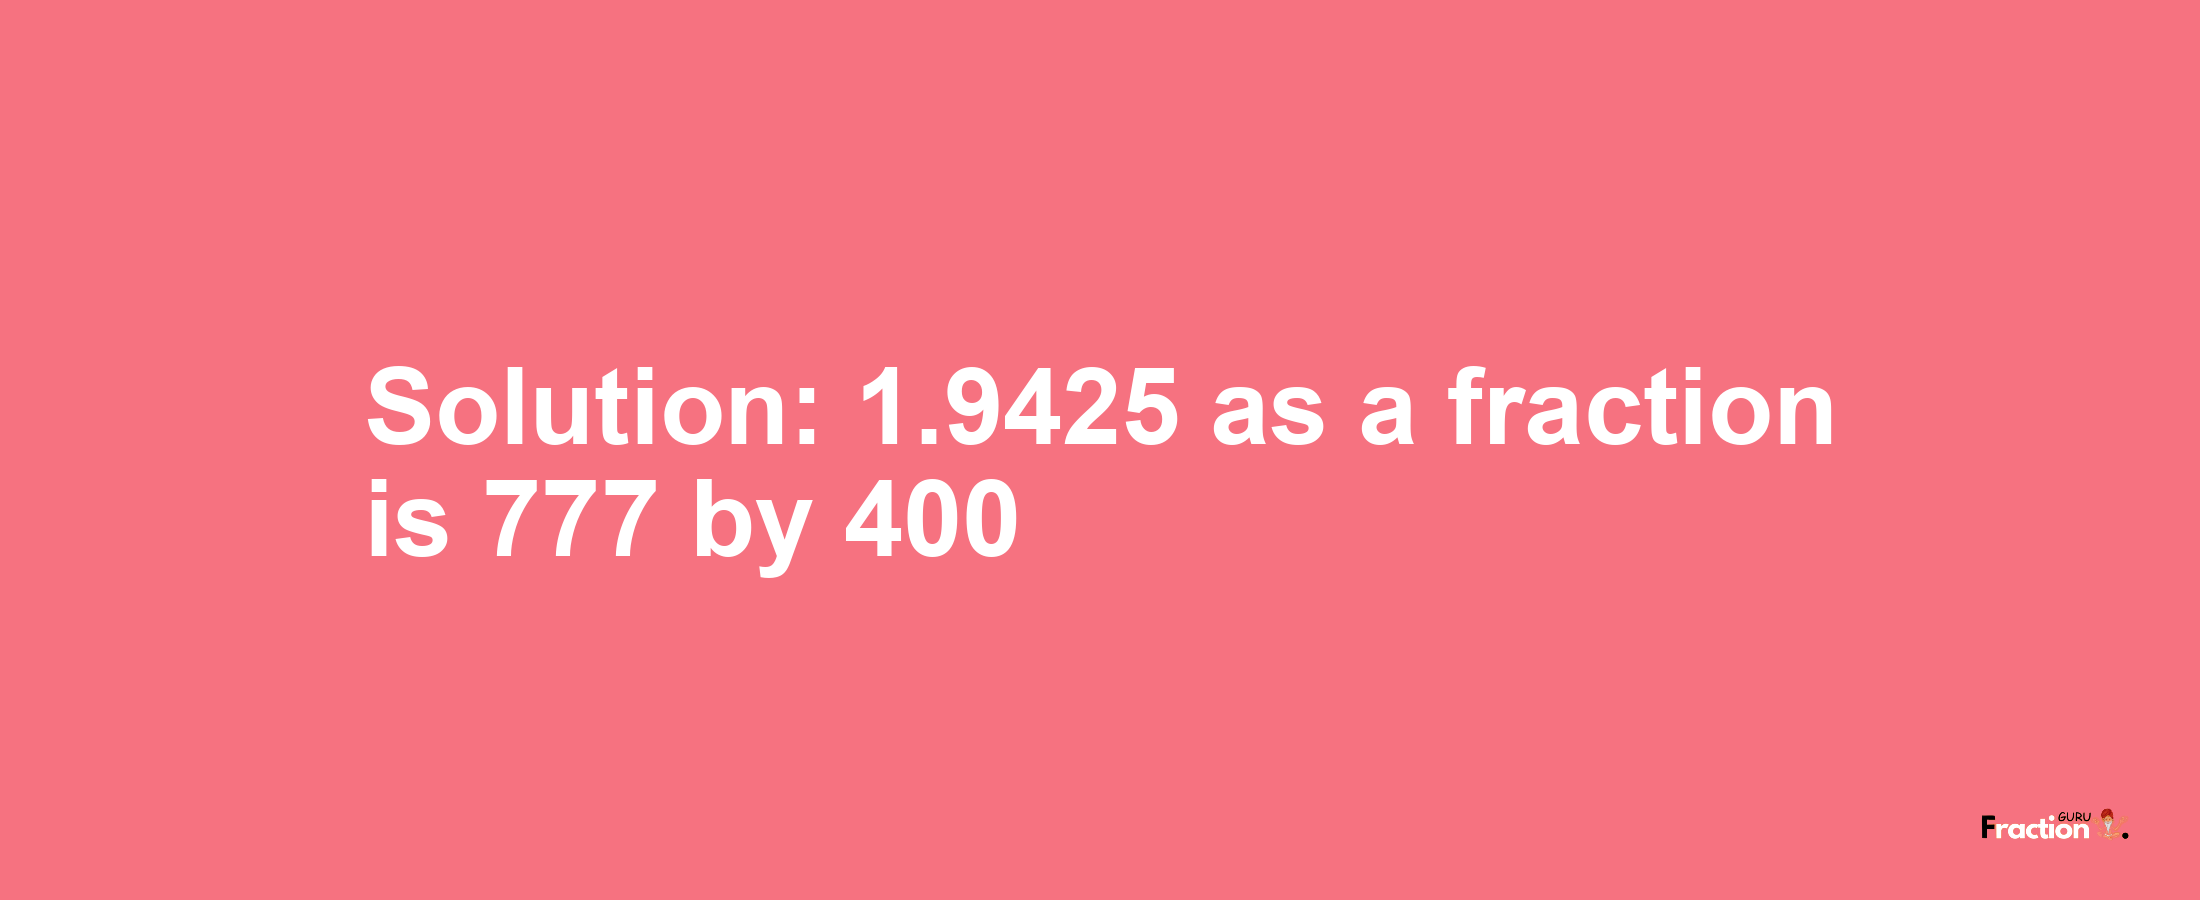 Solution:1.9425 as a fraction is 777/400